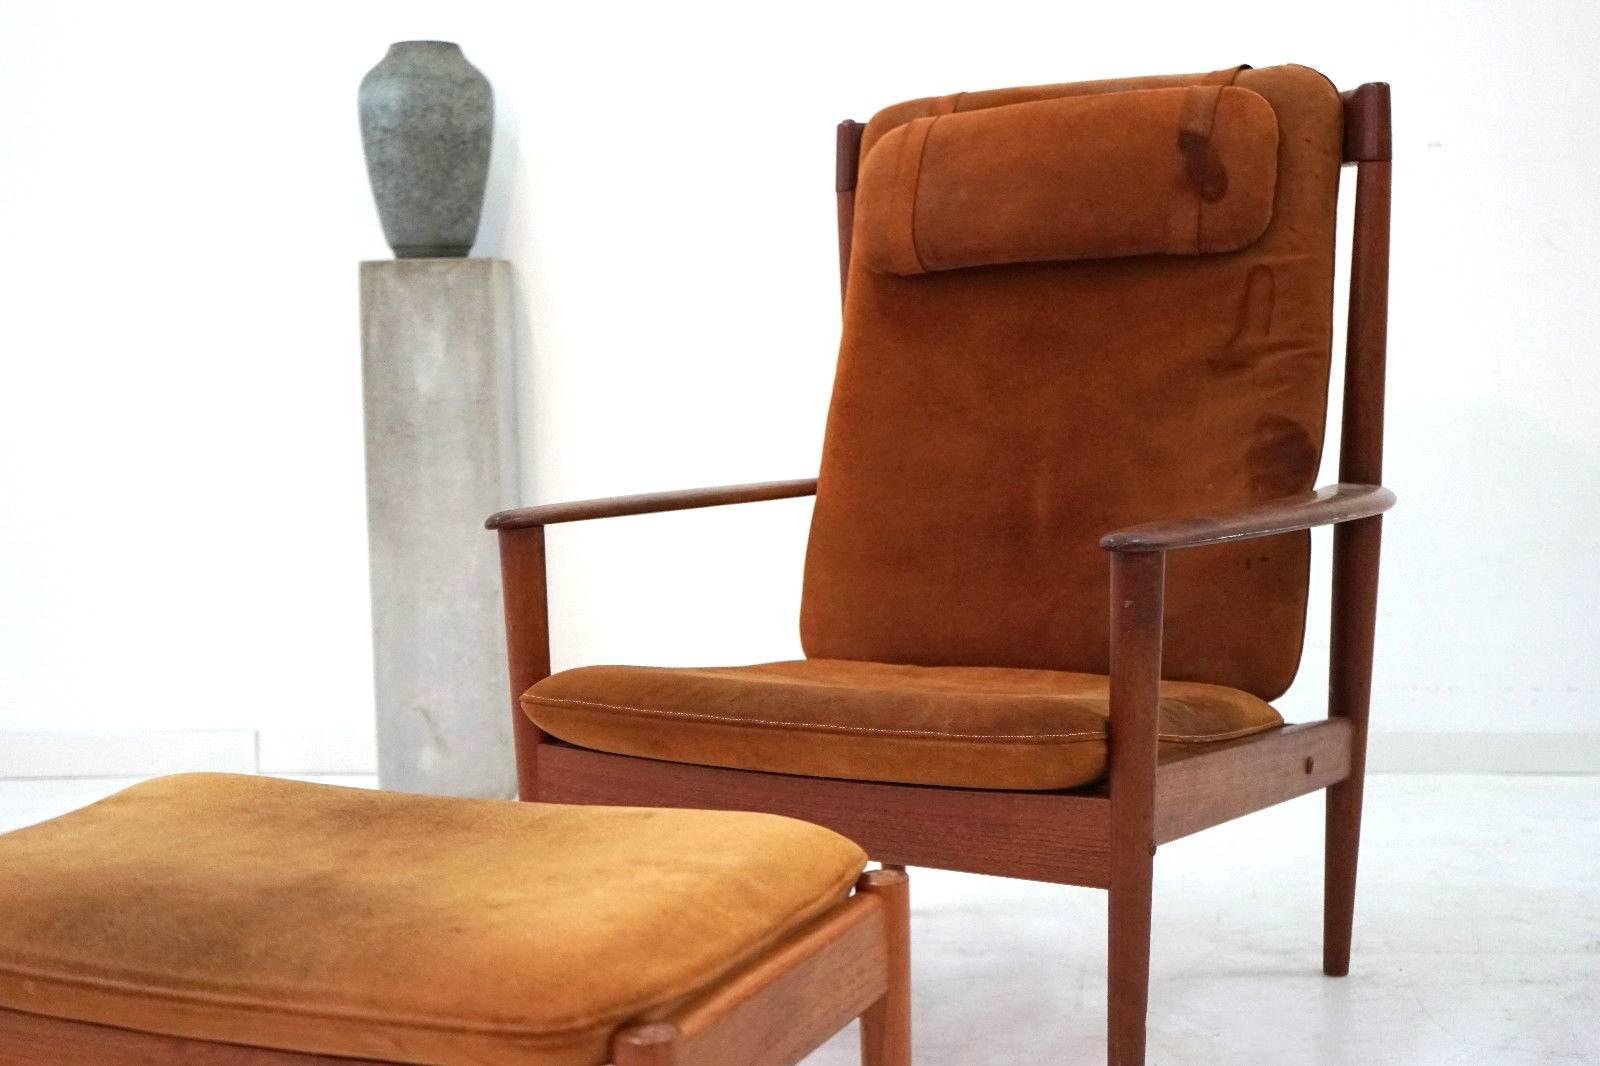 Mid-Century Modern Grete Jalk for Poul Jeppesen PJ56 Danish Leather Lounge Armchair and Ottoman